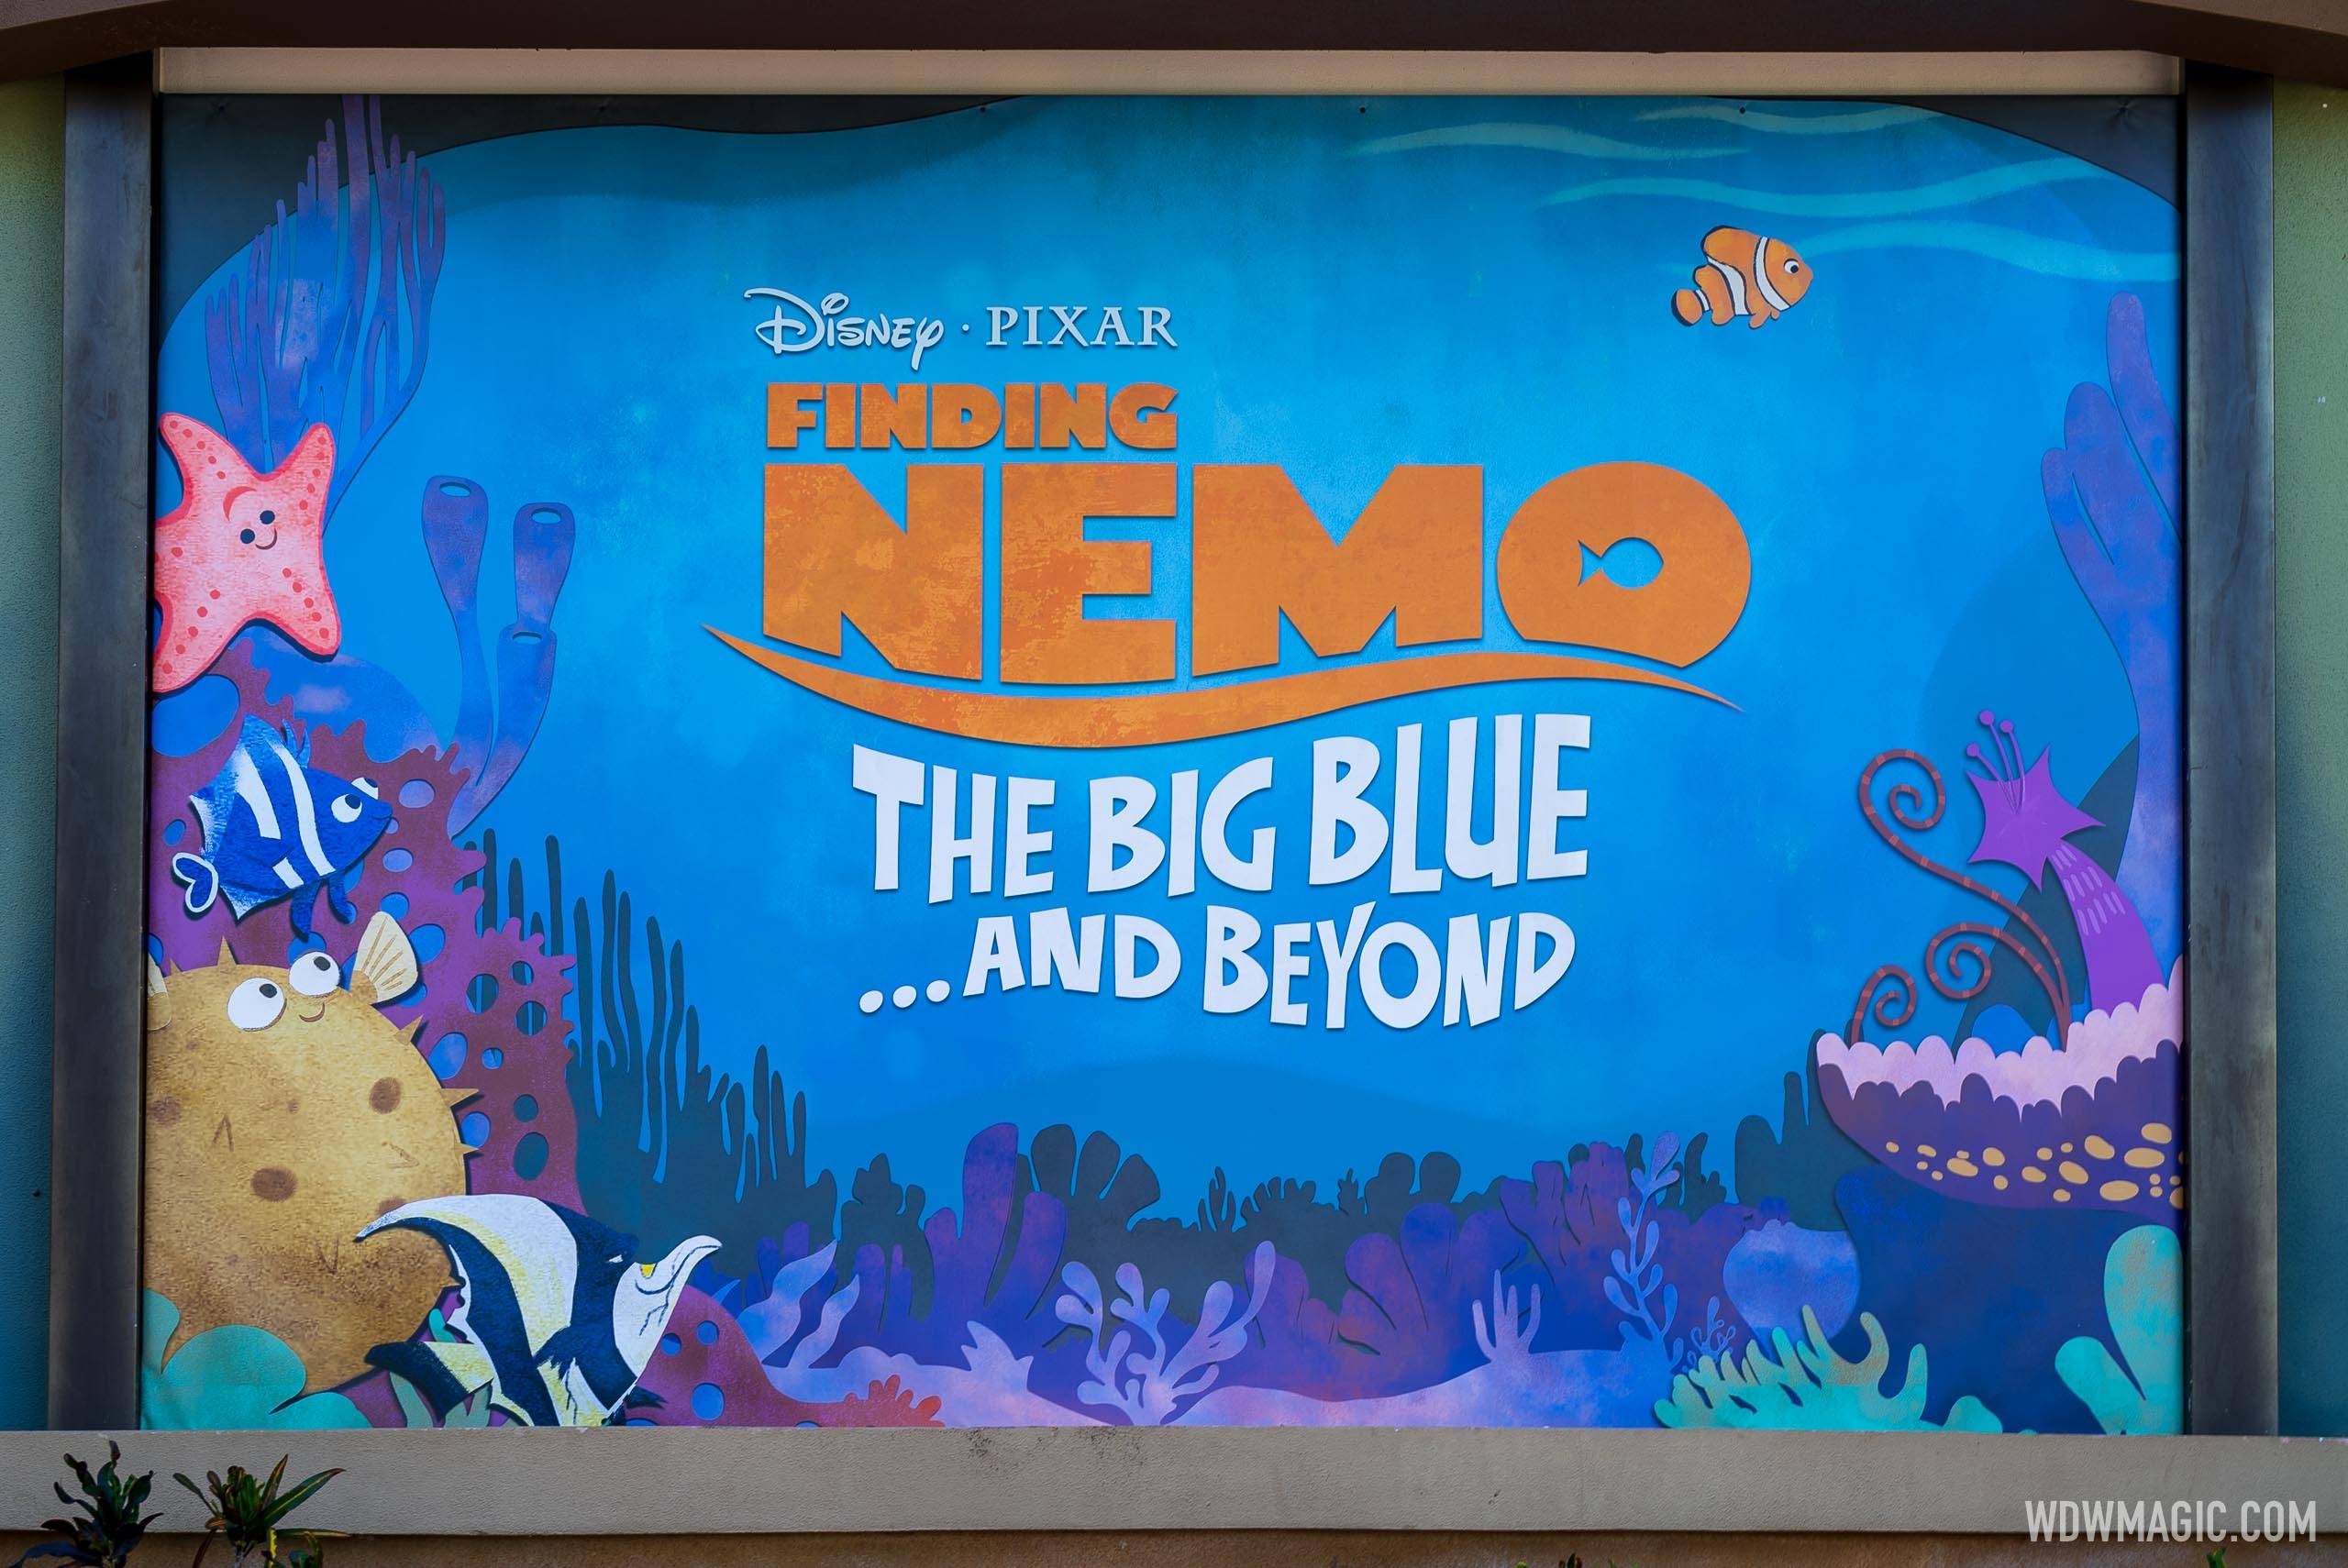 The Finding Nemo poster at the Theater in the Wild